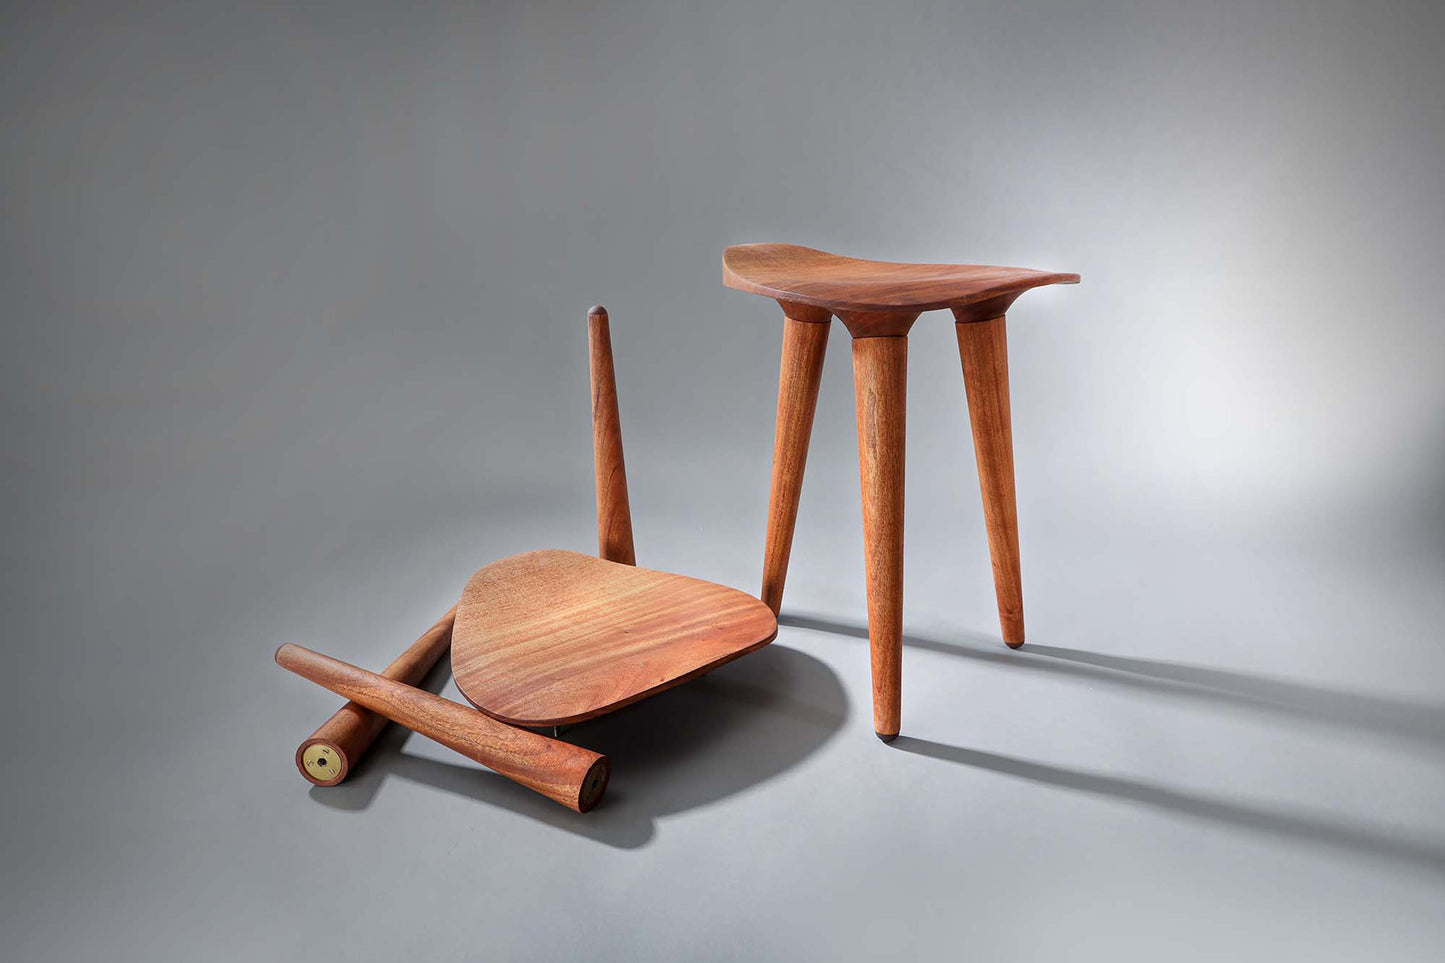 Whittle - The milking Stool